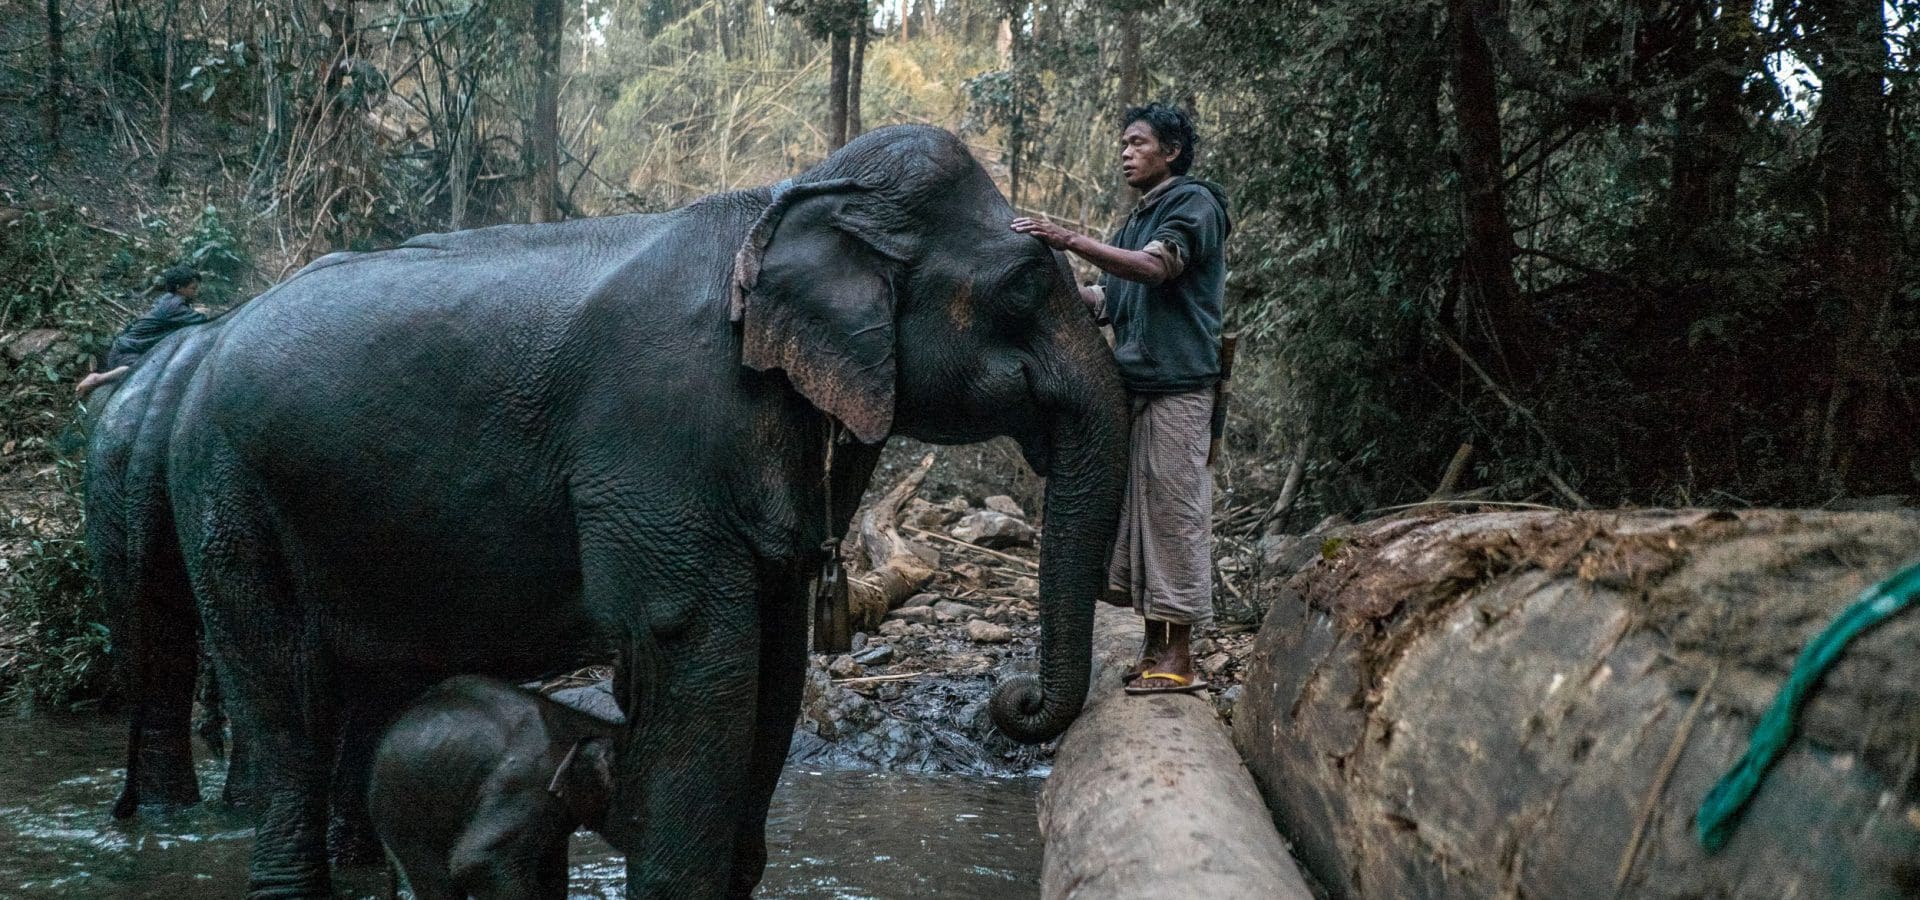 Man strokes head of an elephant stood in a river with her baby